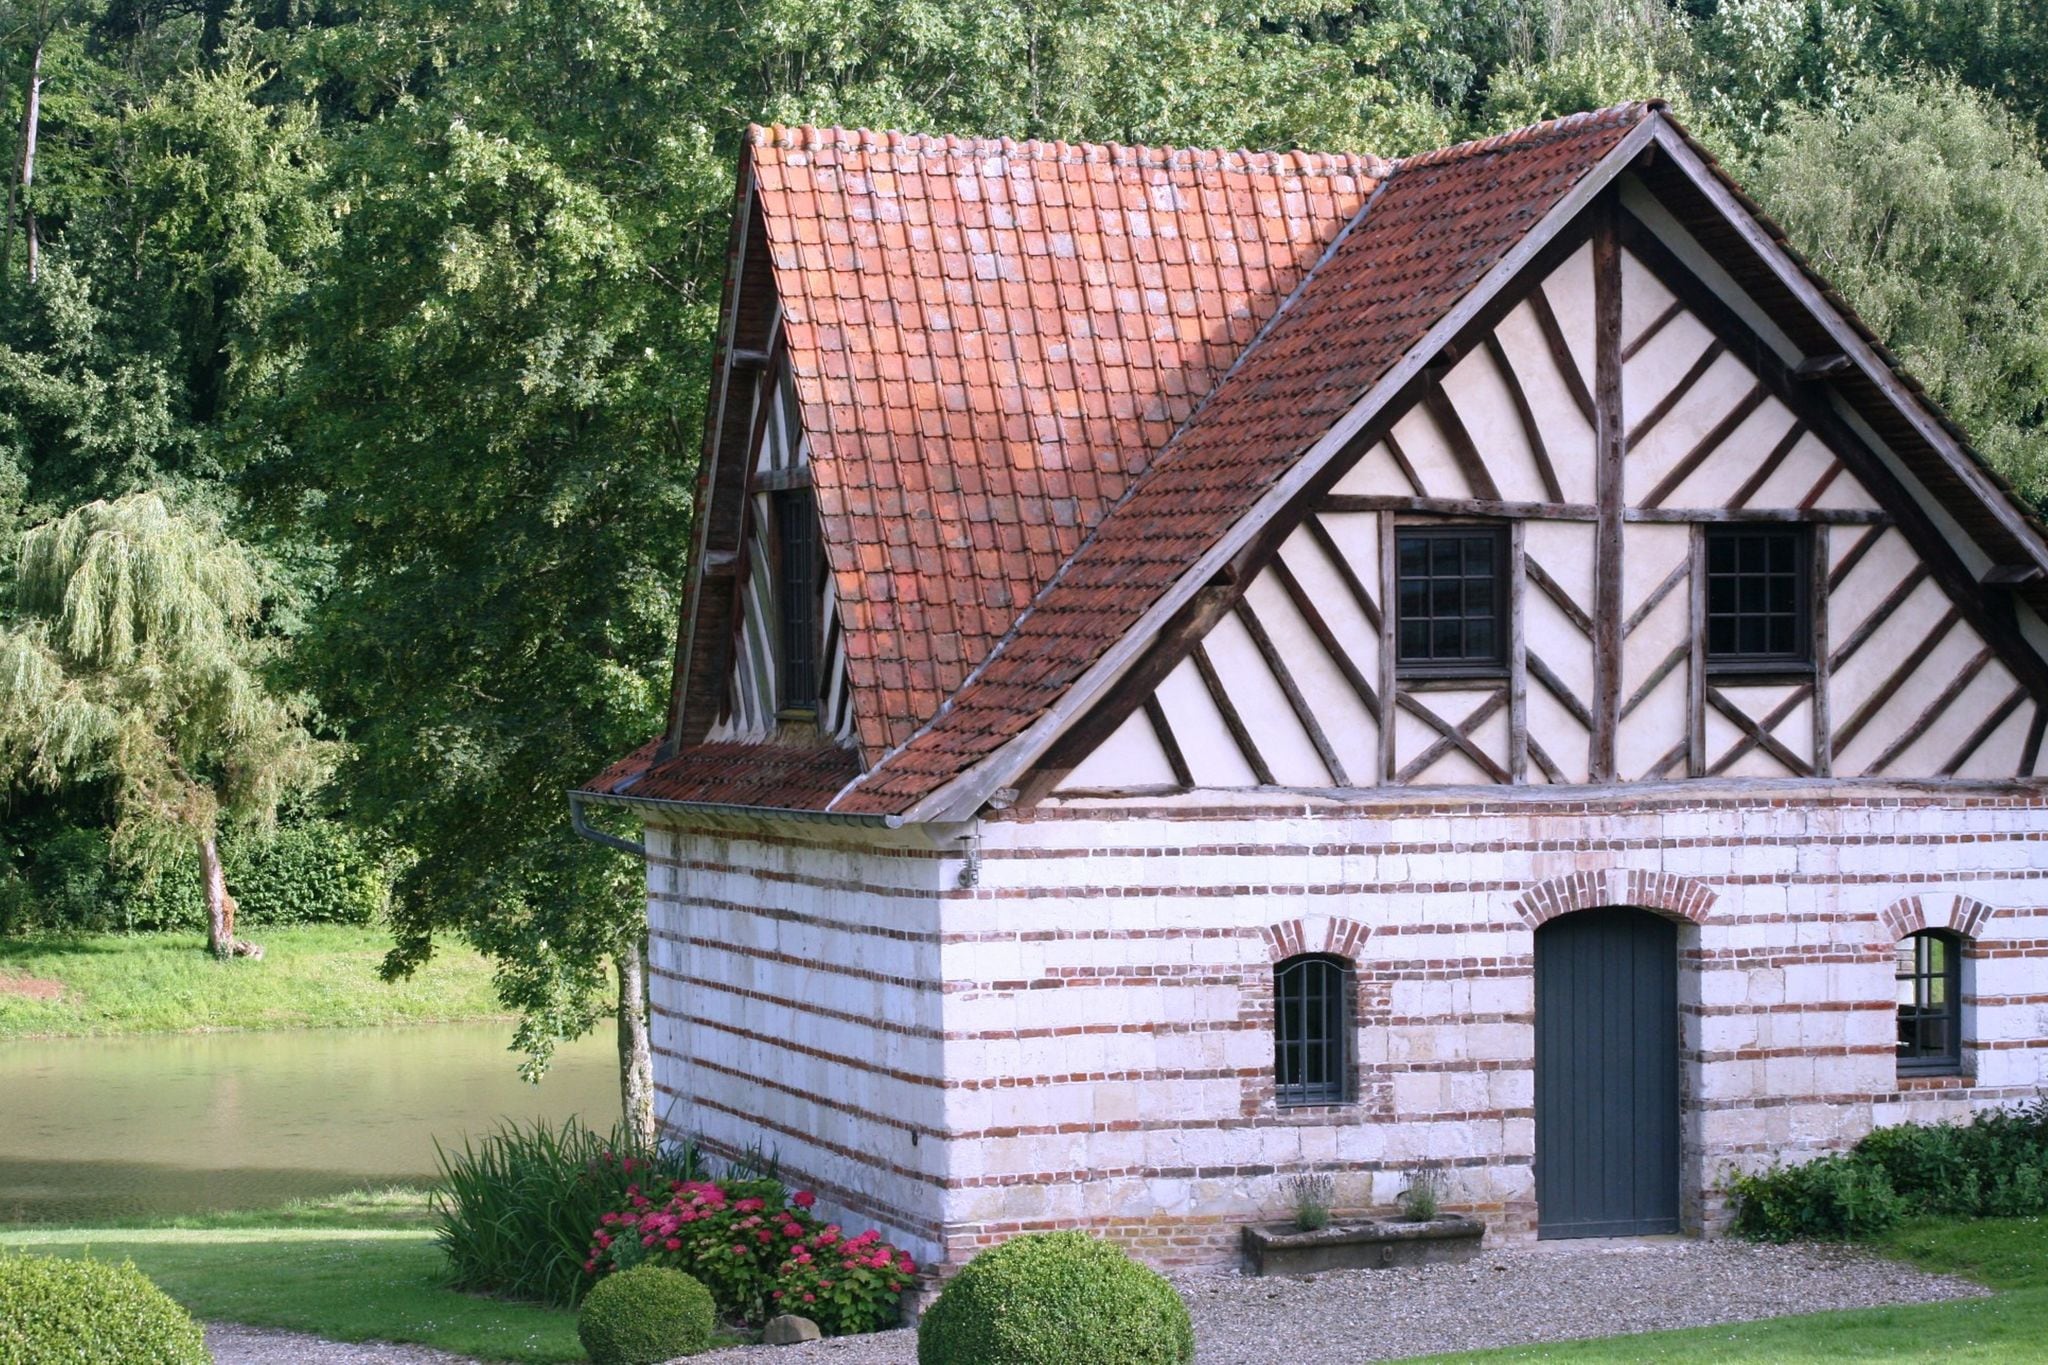 Charming half-timbered house on quiet waterside between Abbeville and Amiens